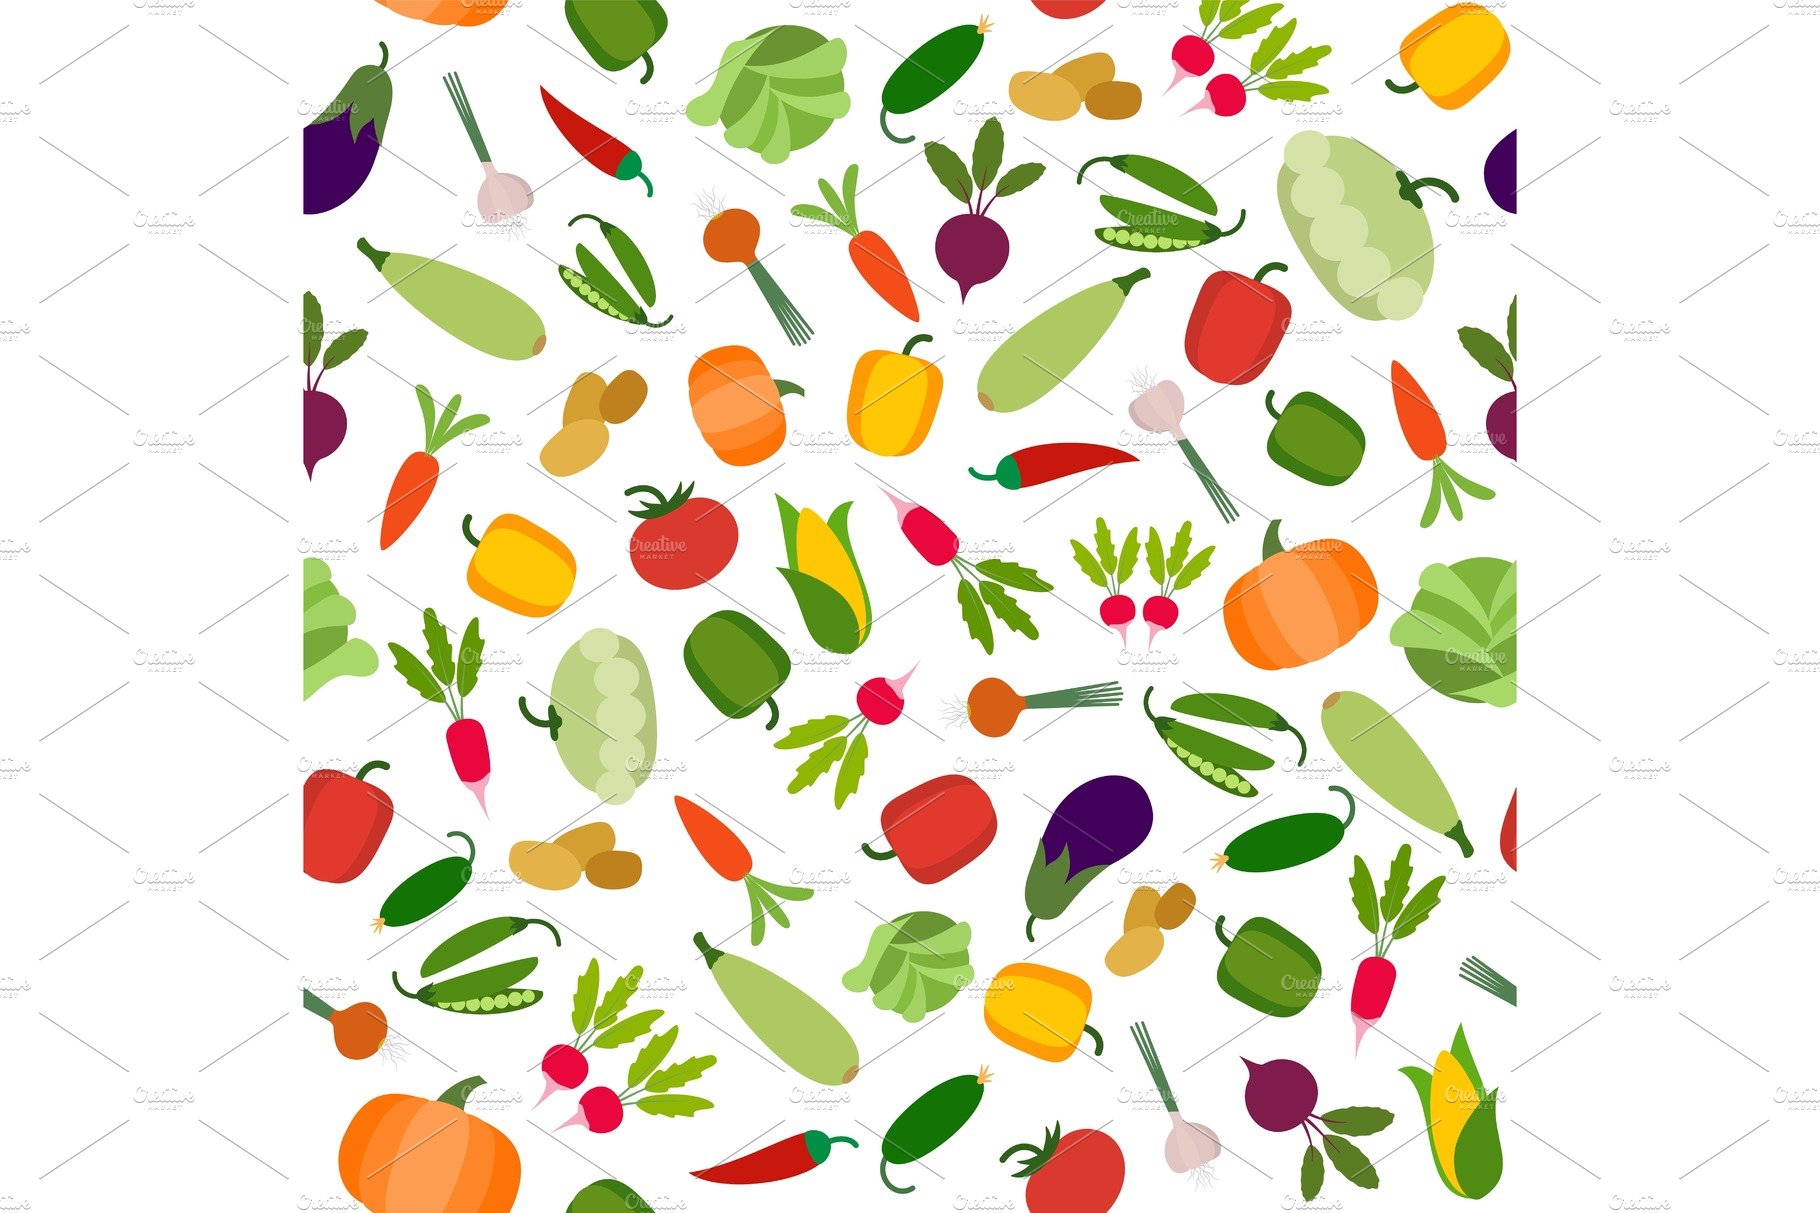 Vegetables organic seamless pattern cover image.